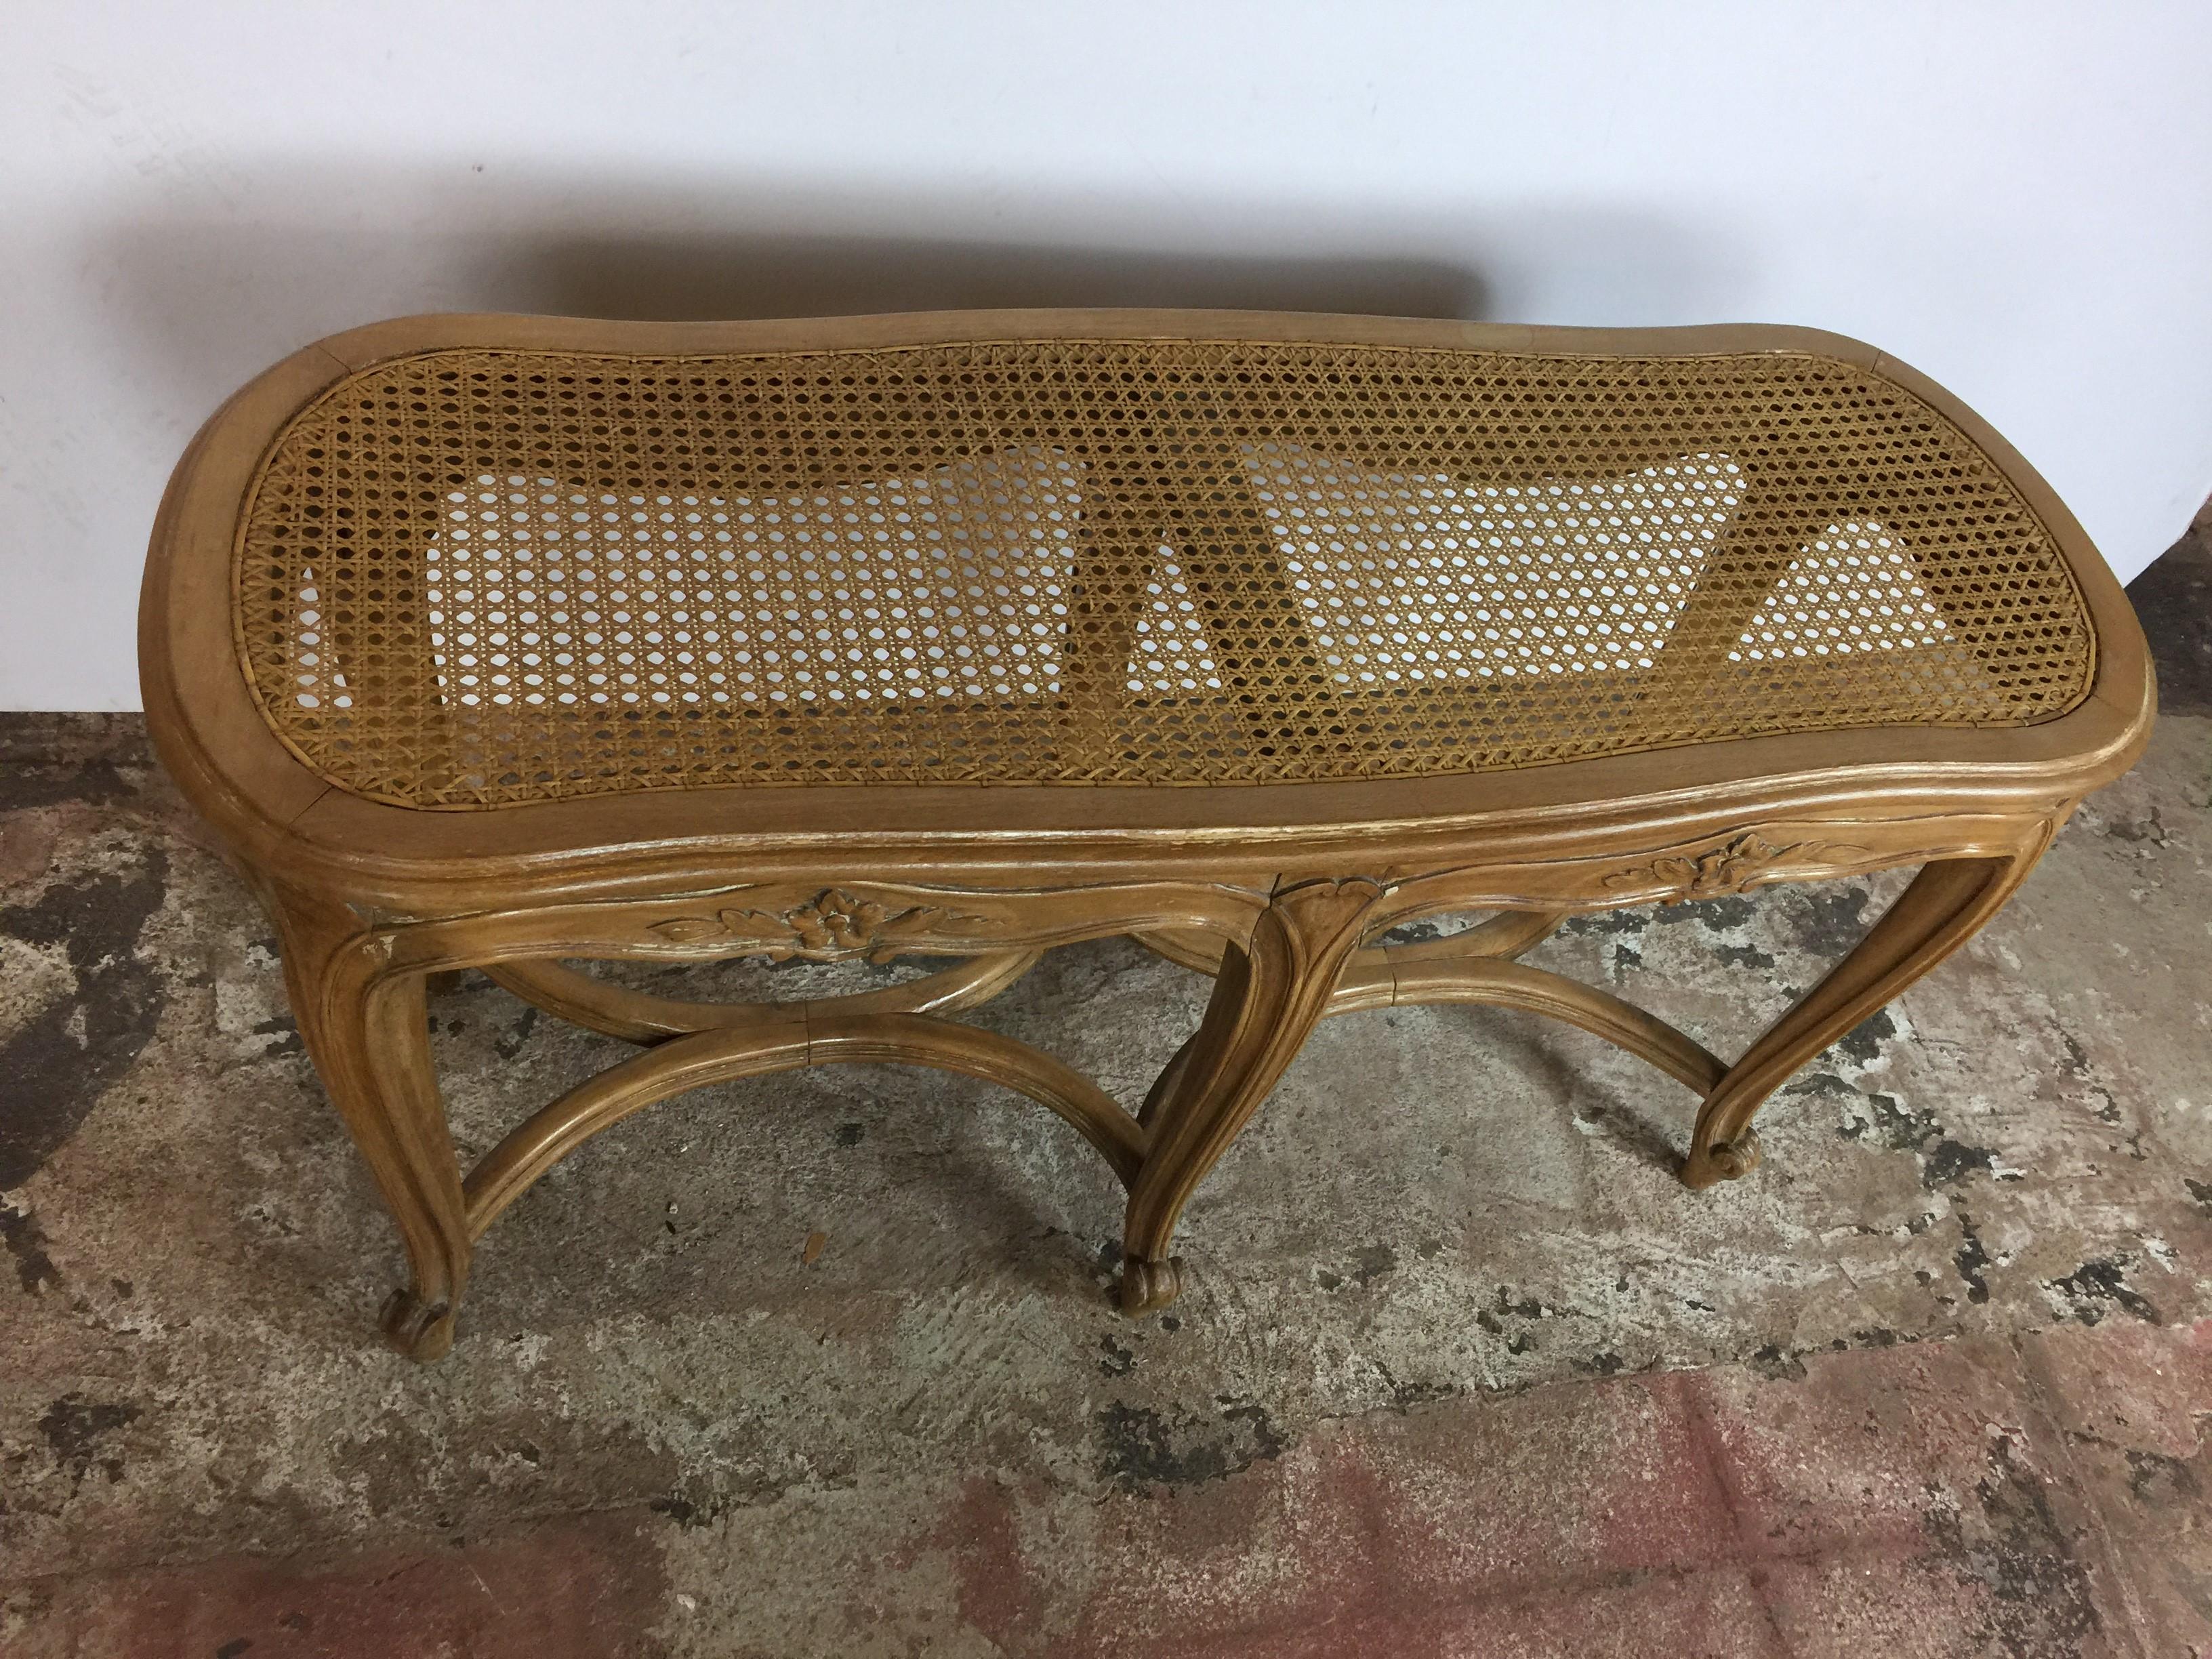 Louis XV style cane seat bench. 
The bench has a beautiful natural finish.